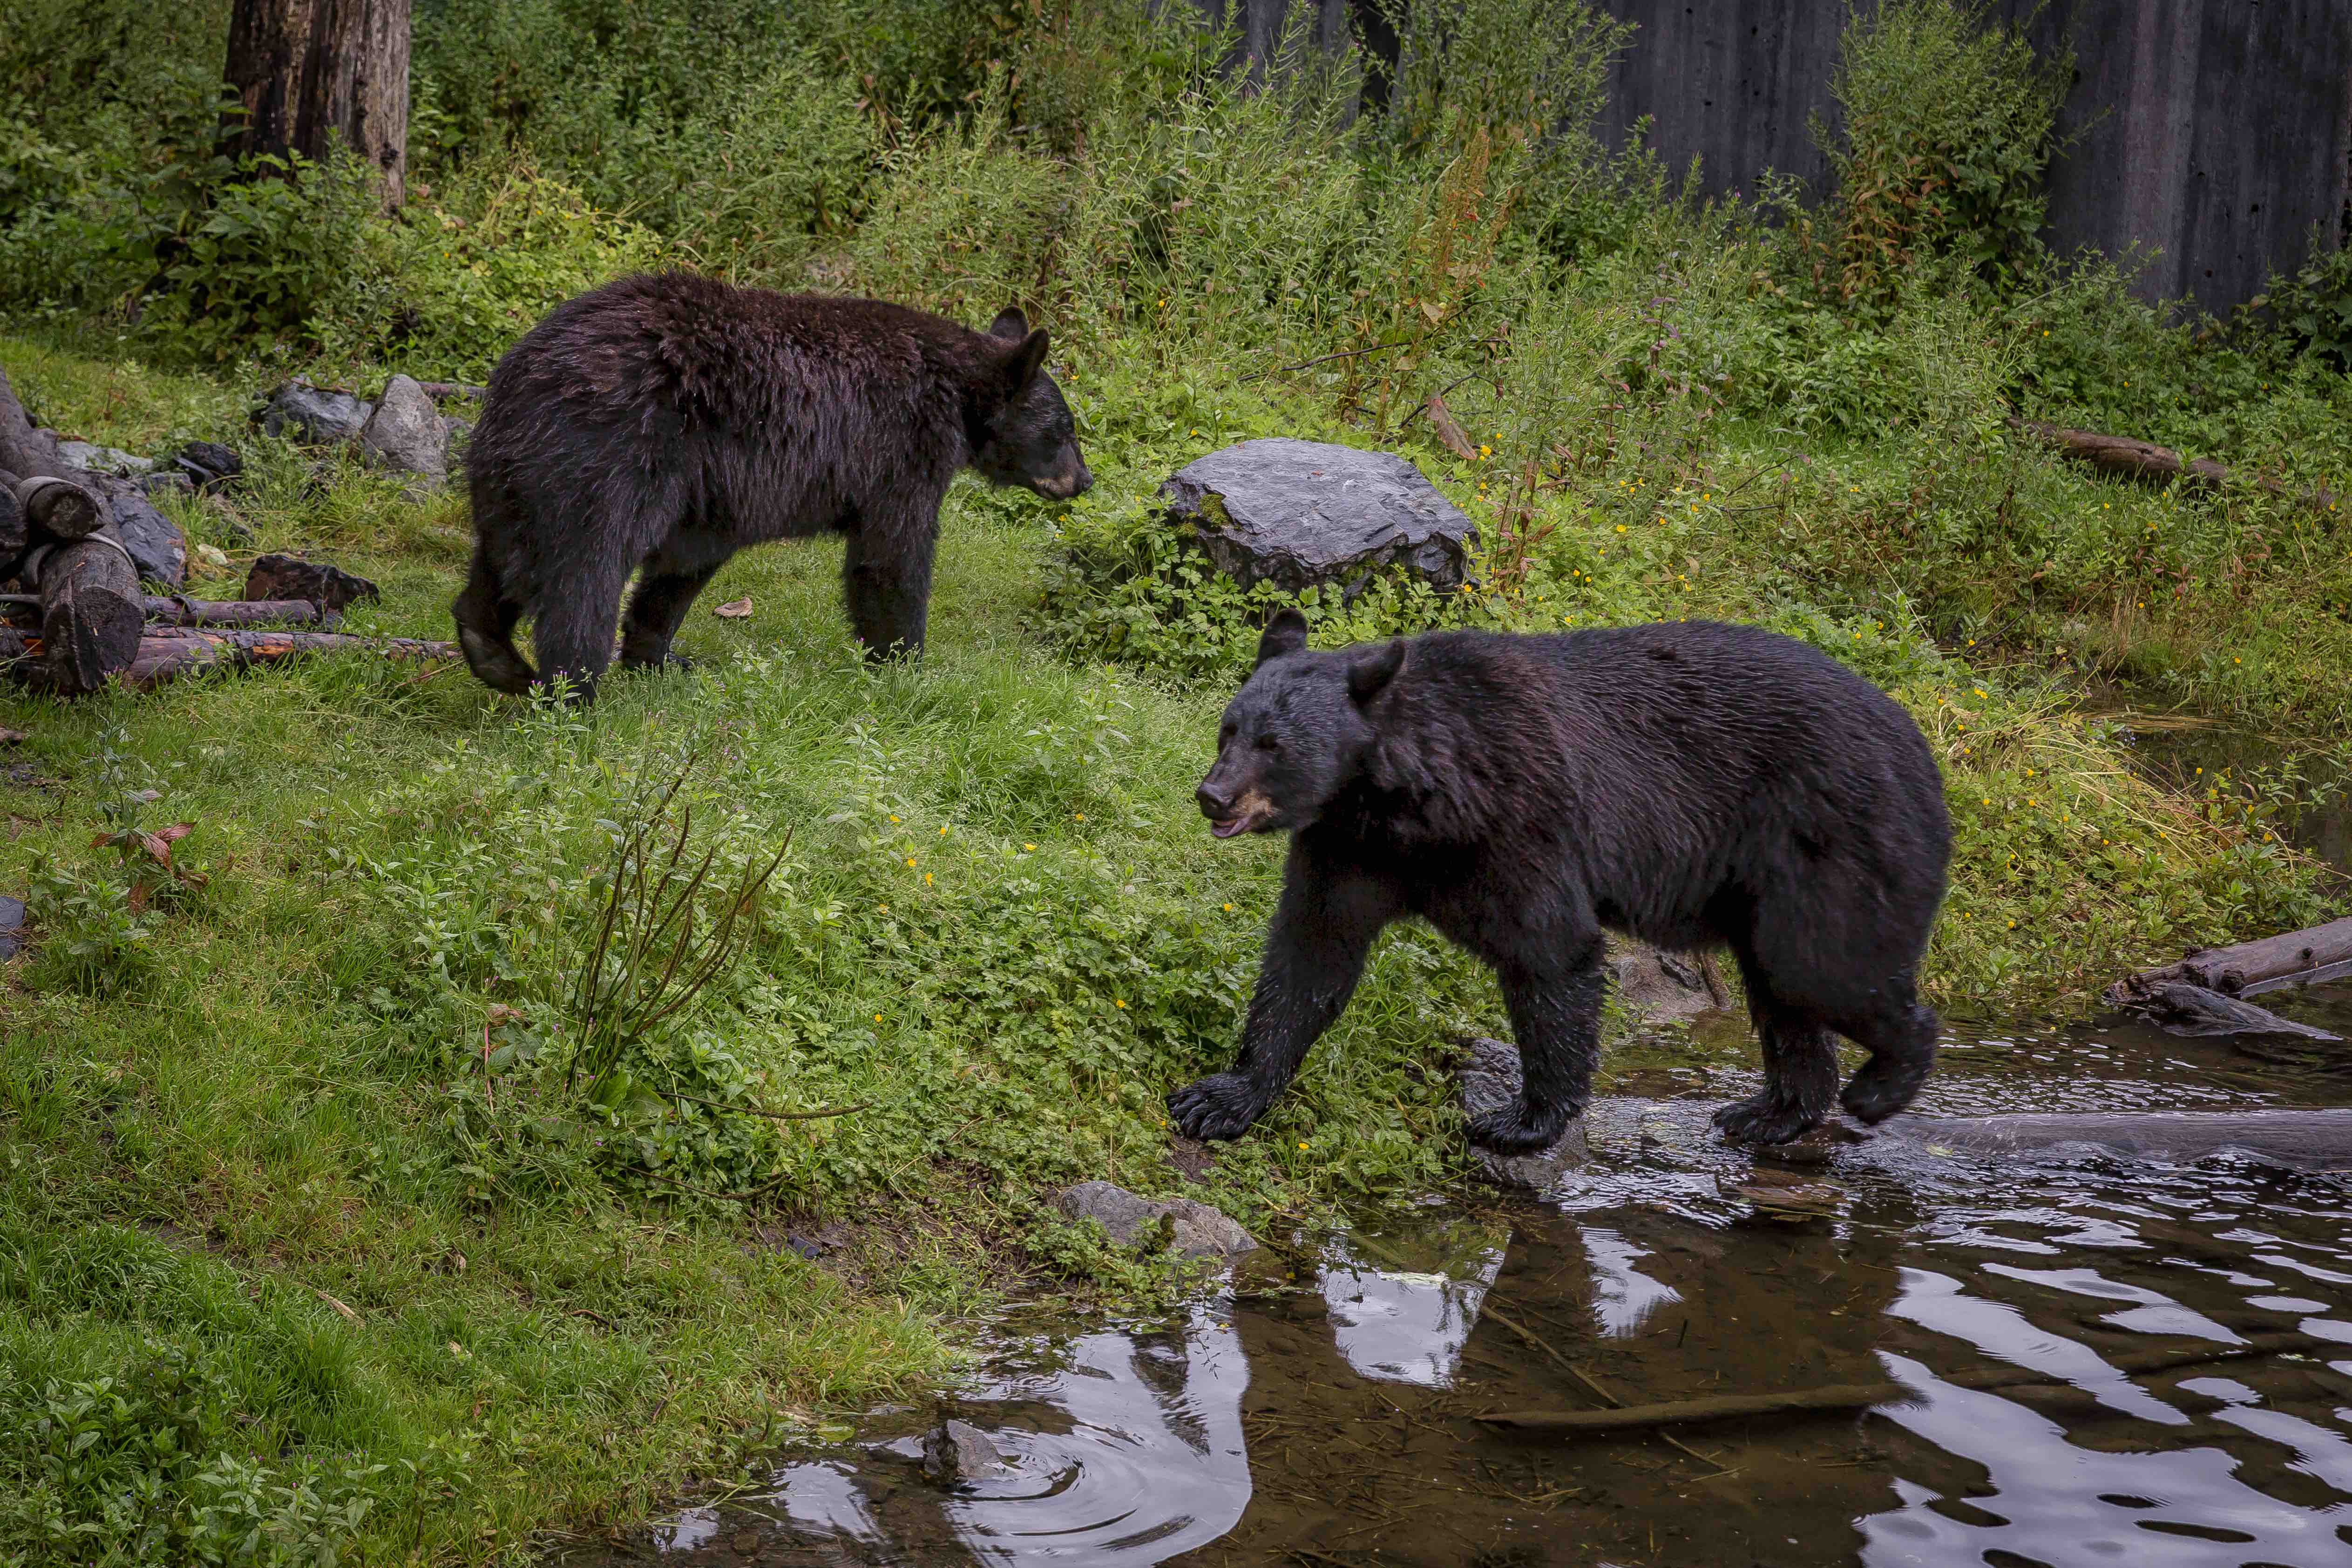 A couple of Black Bears roaming along the lush riverbed